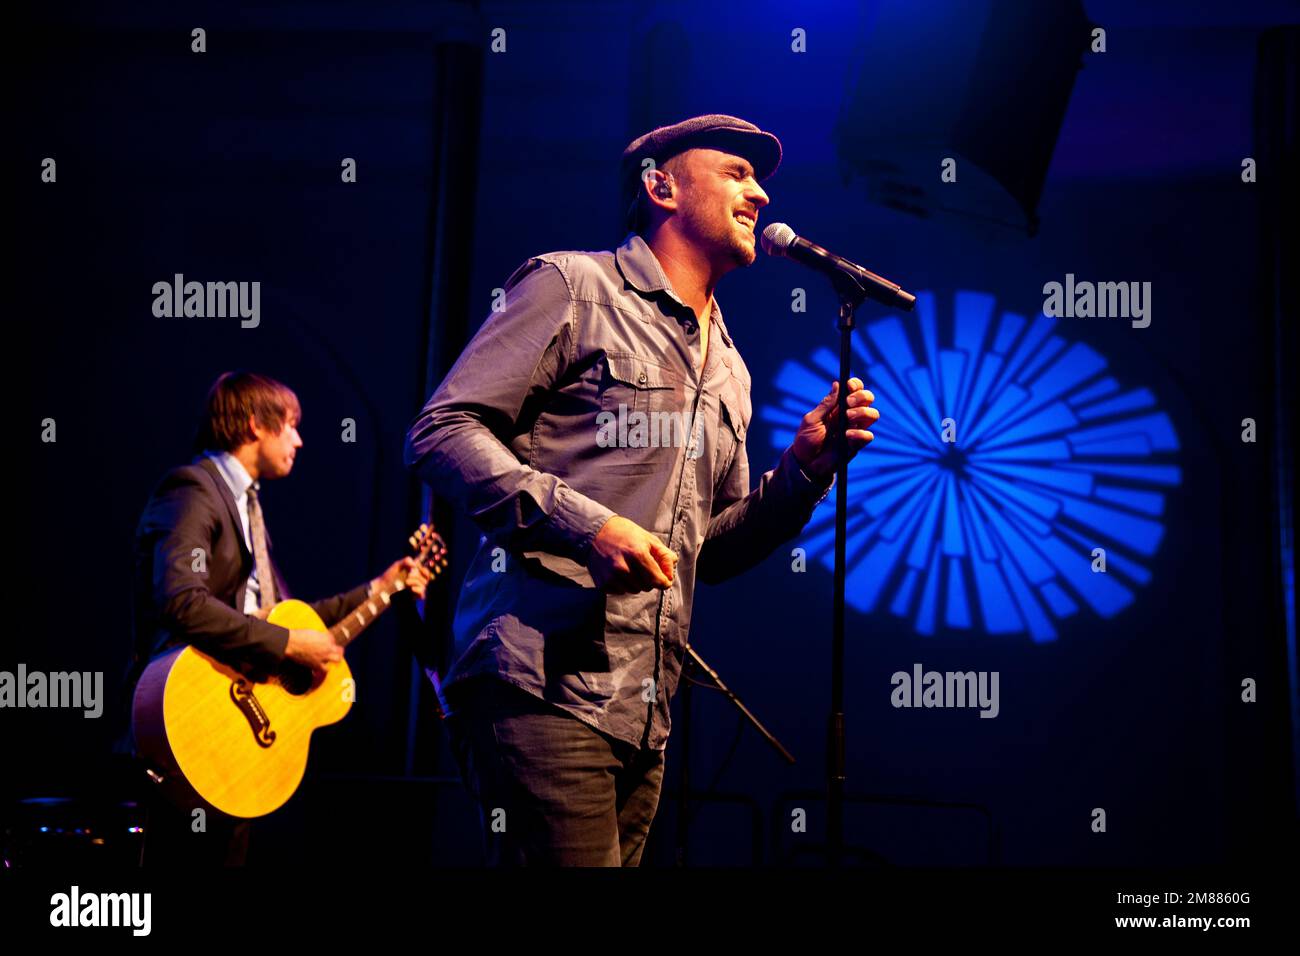 Max Mutzke, German singer, songwriter and television personality. Stock Photo